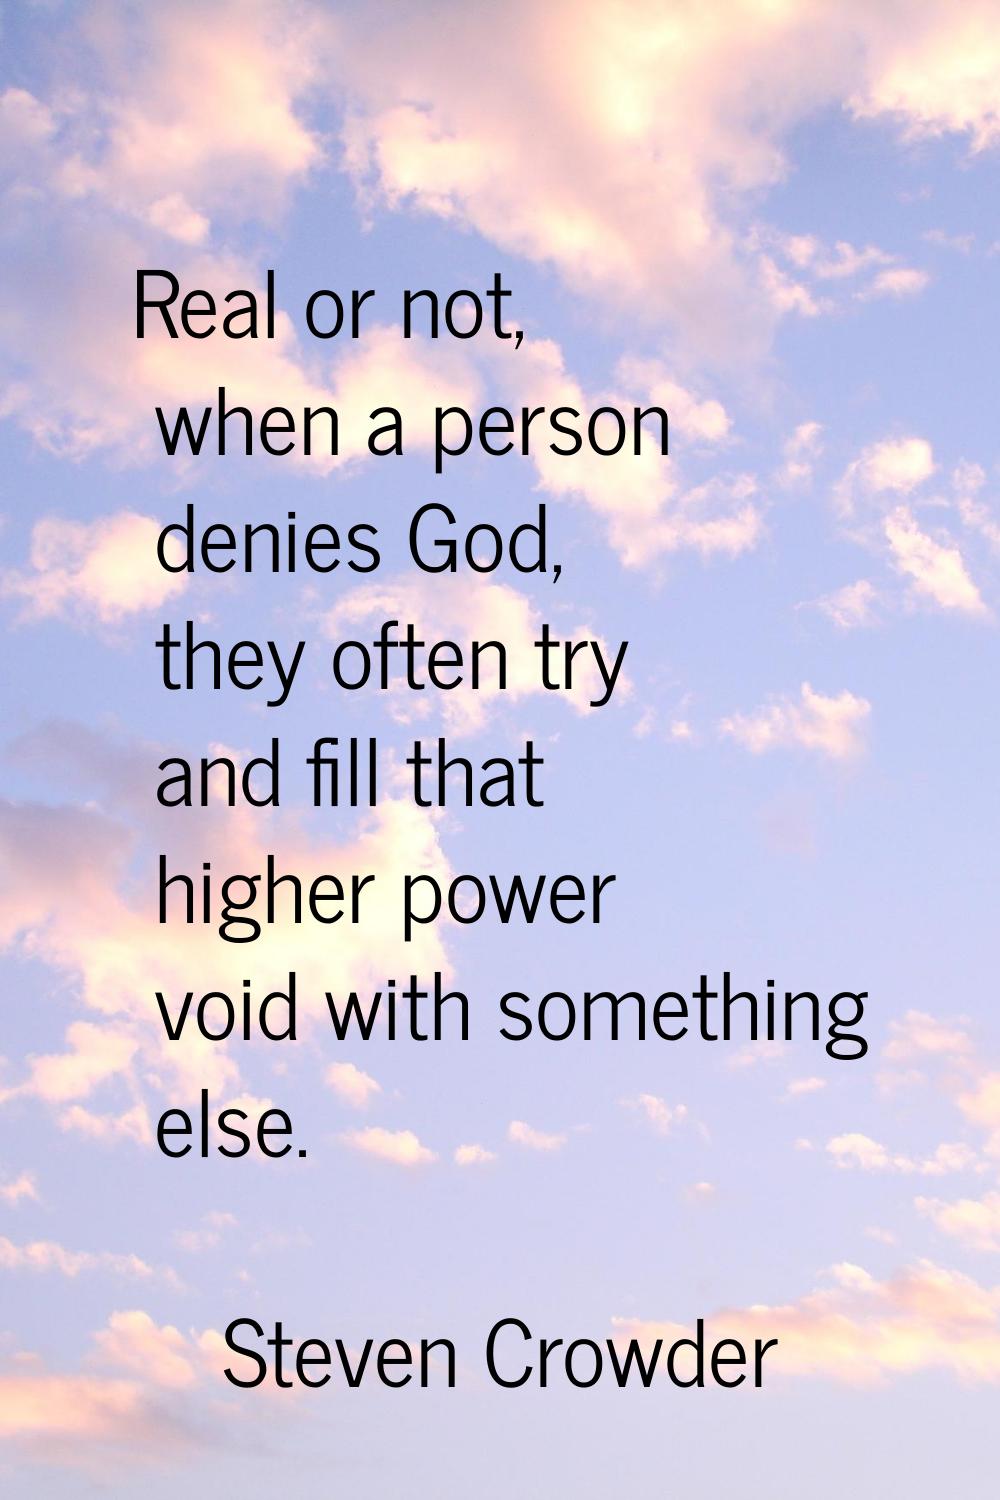 Real or not, when a person denies God, they often try and fill that higher power void with somethin